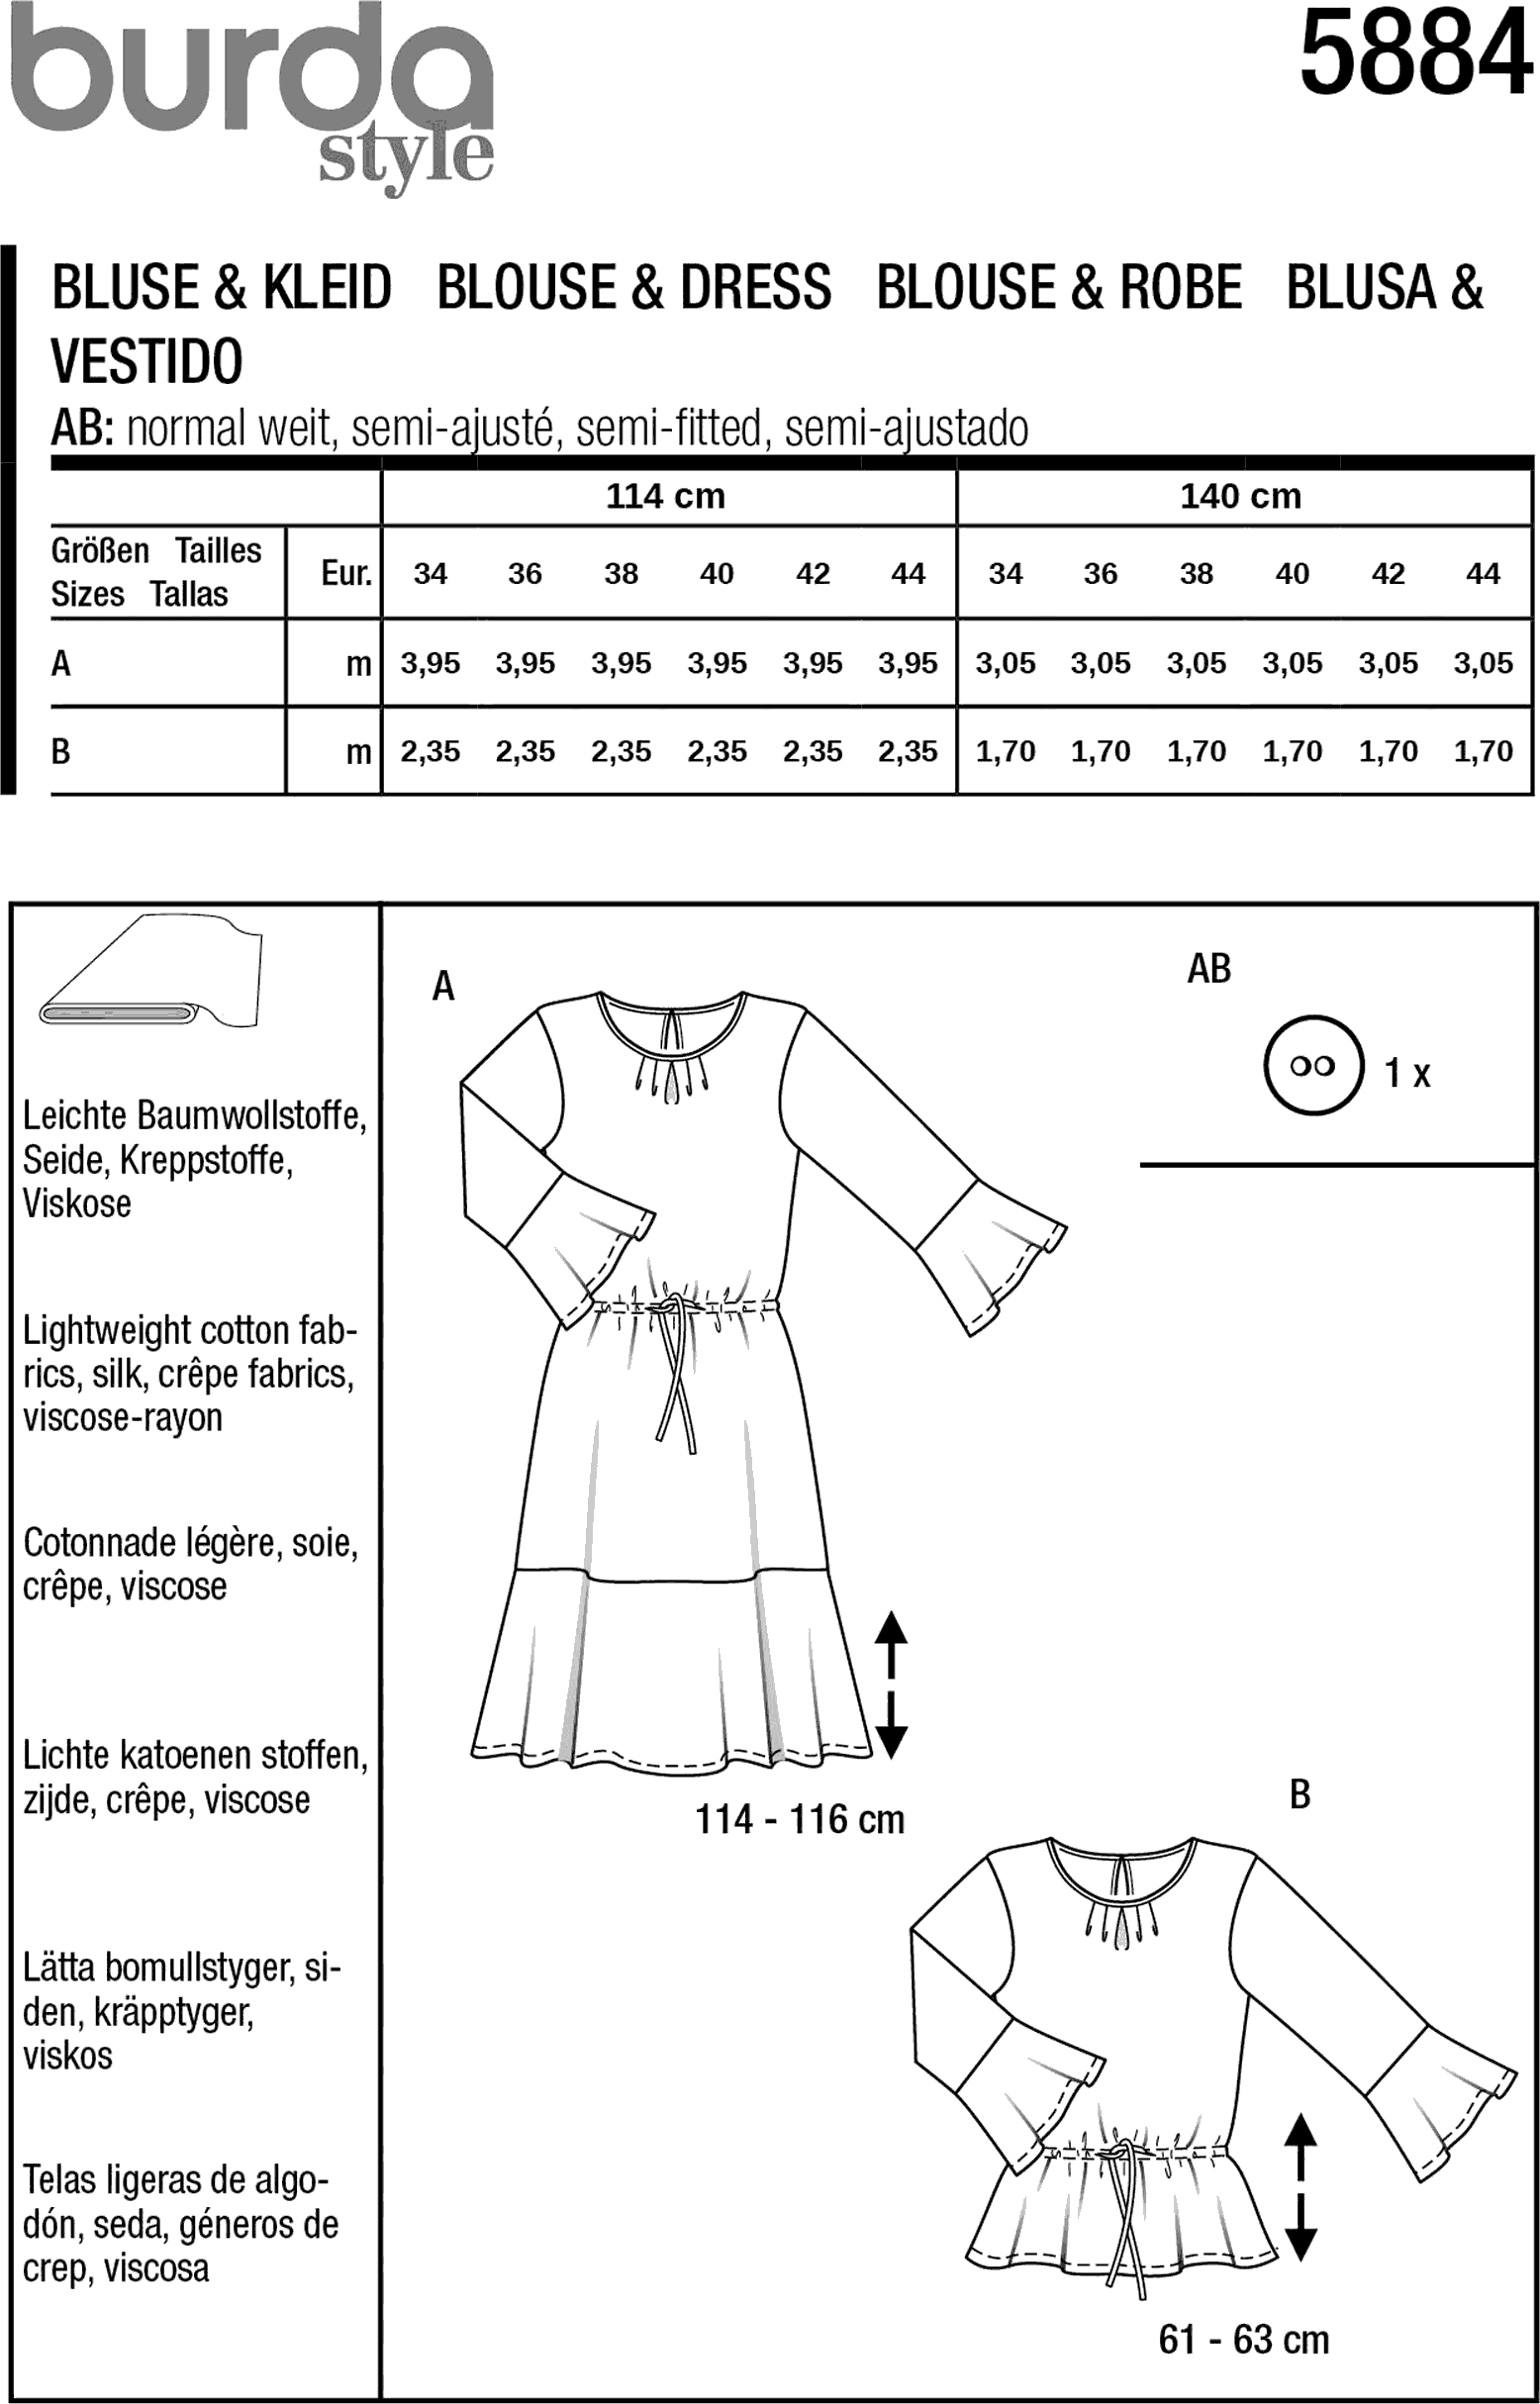 Burda Style Pattern 5884 Misses Blouse and Dress B5884 Fabric Quantity Requirements From Patternsandplains.com